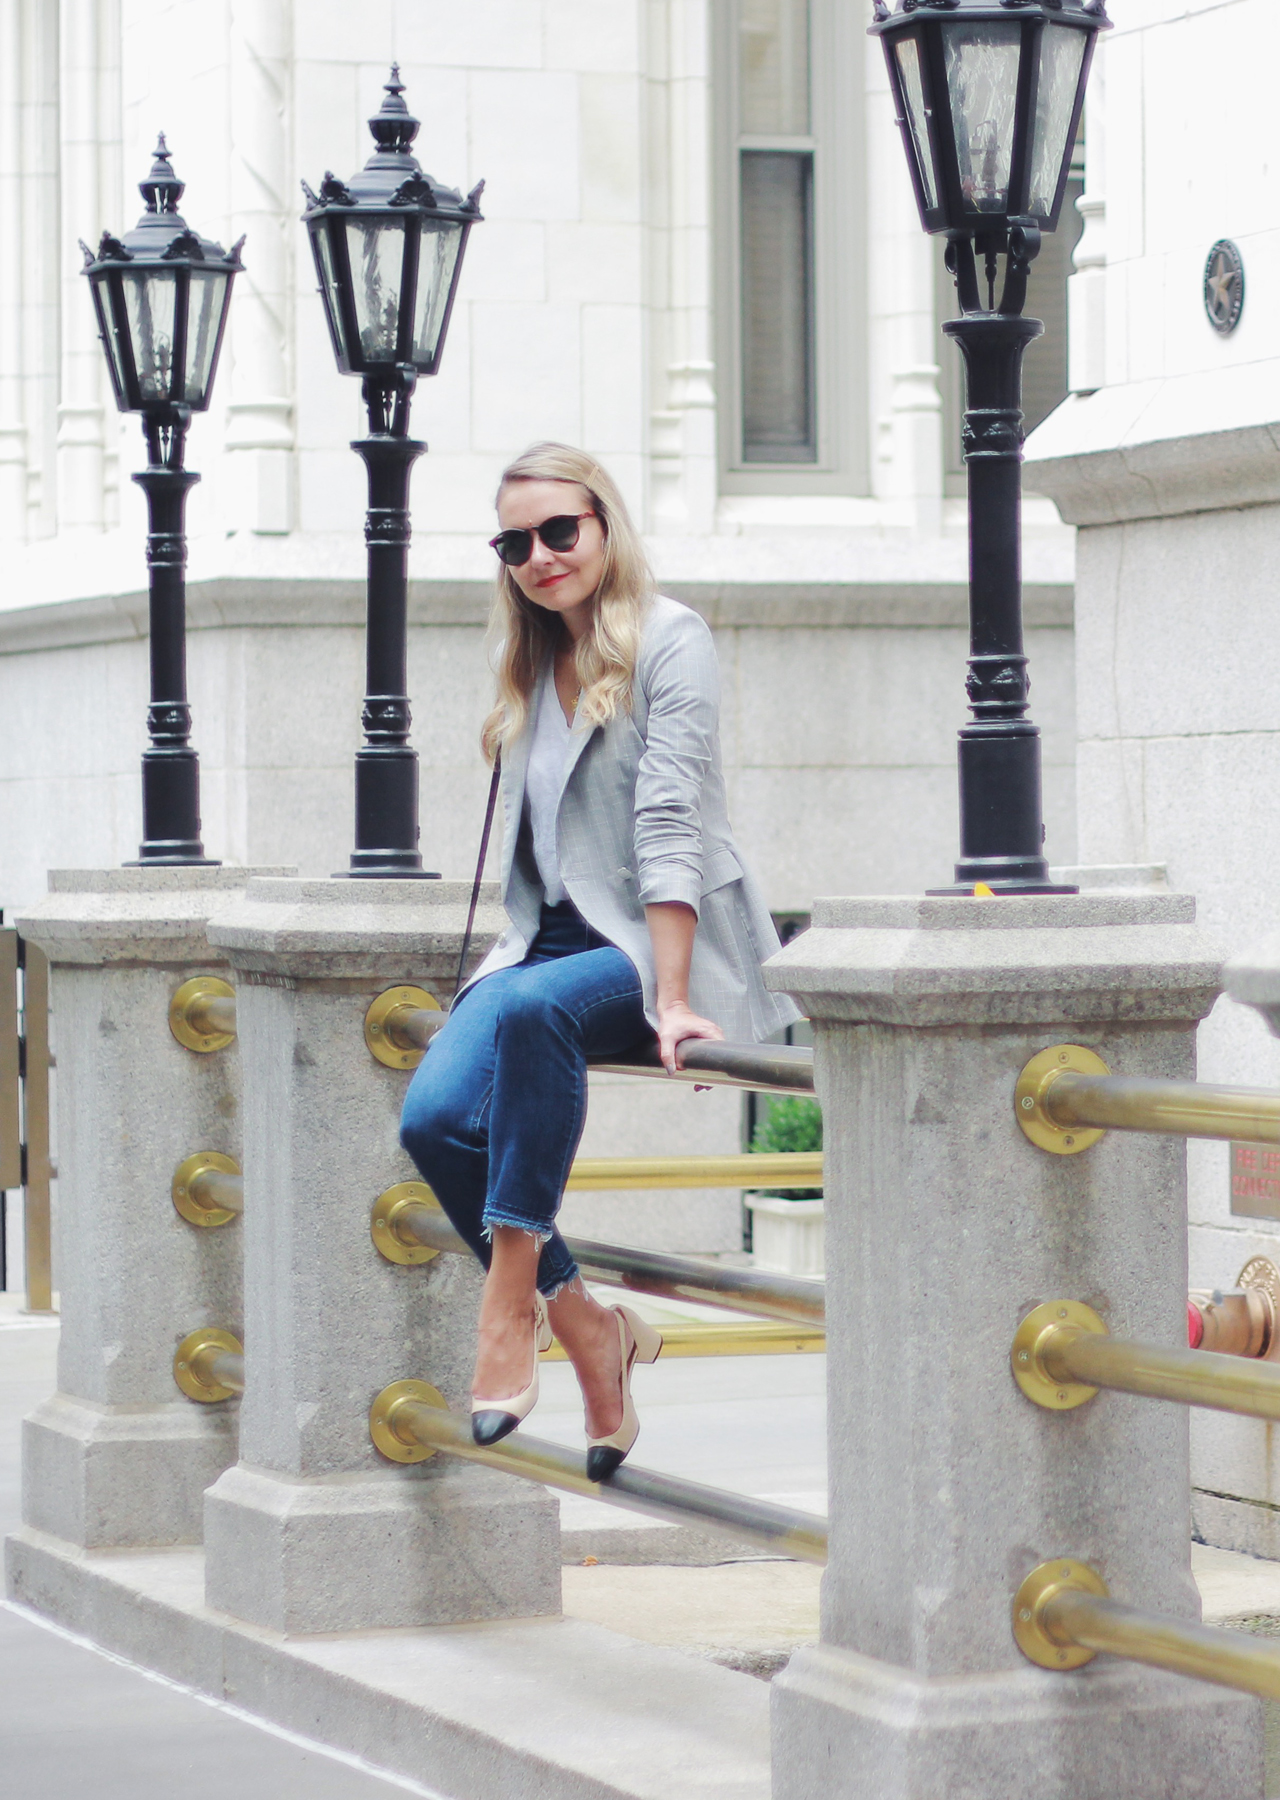 The Steele Maiden: Blazers and Denim - Casual Friday Outfit